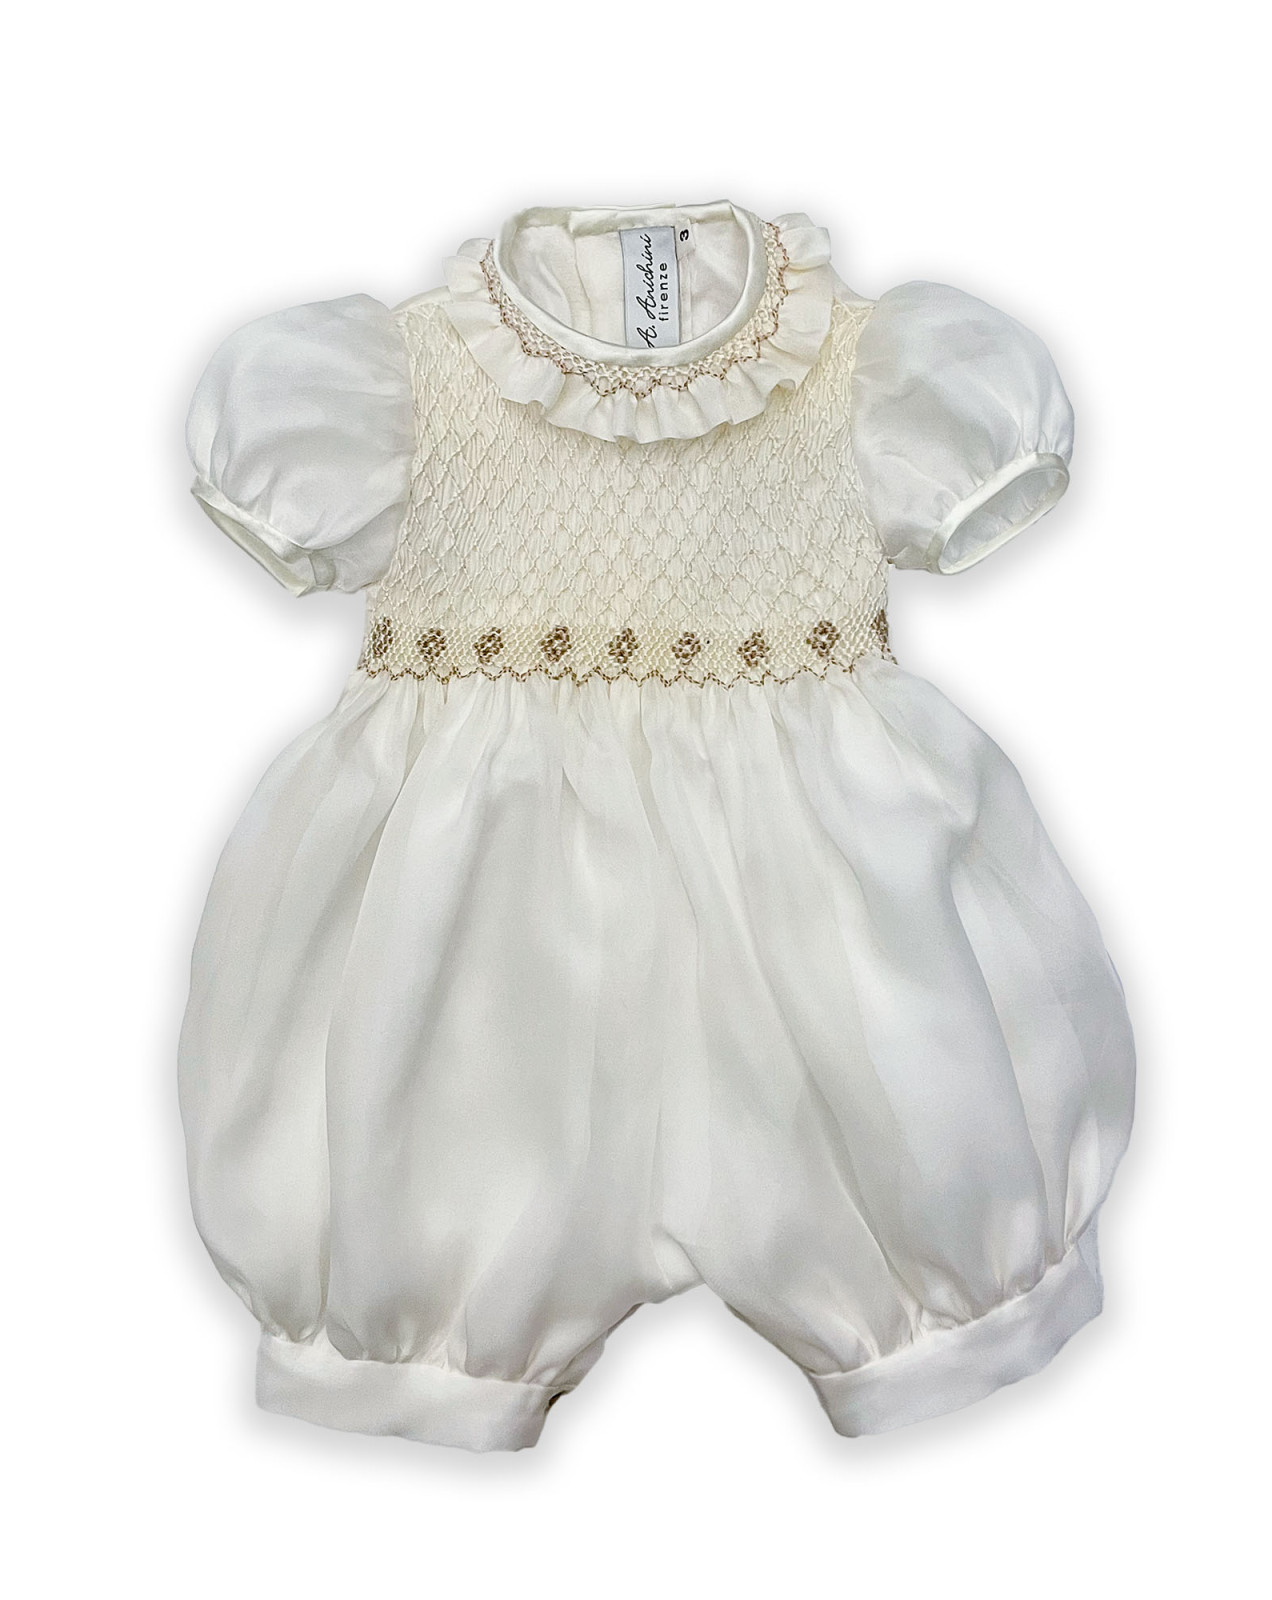 Baby silk romper with smocked bodice